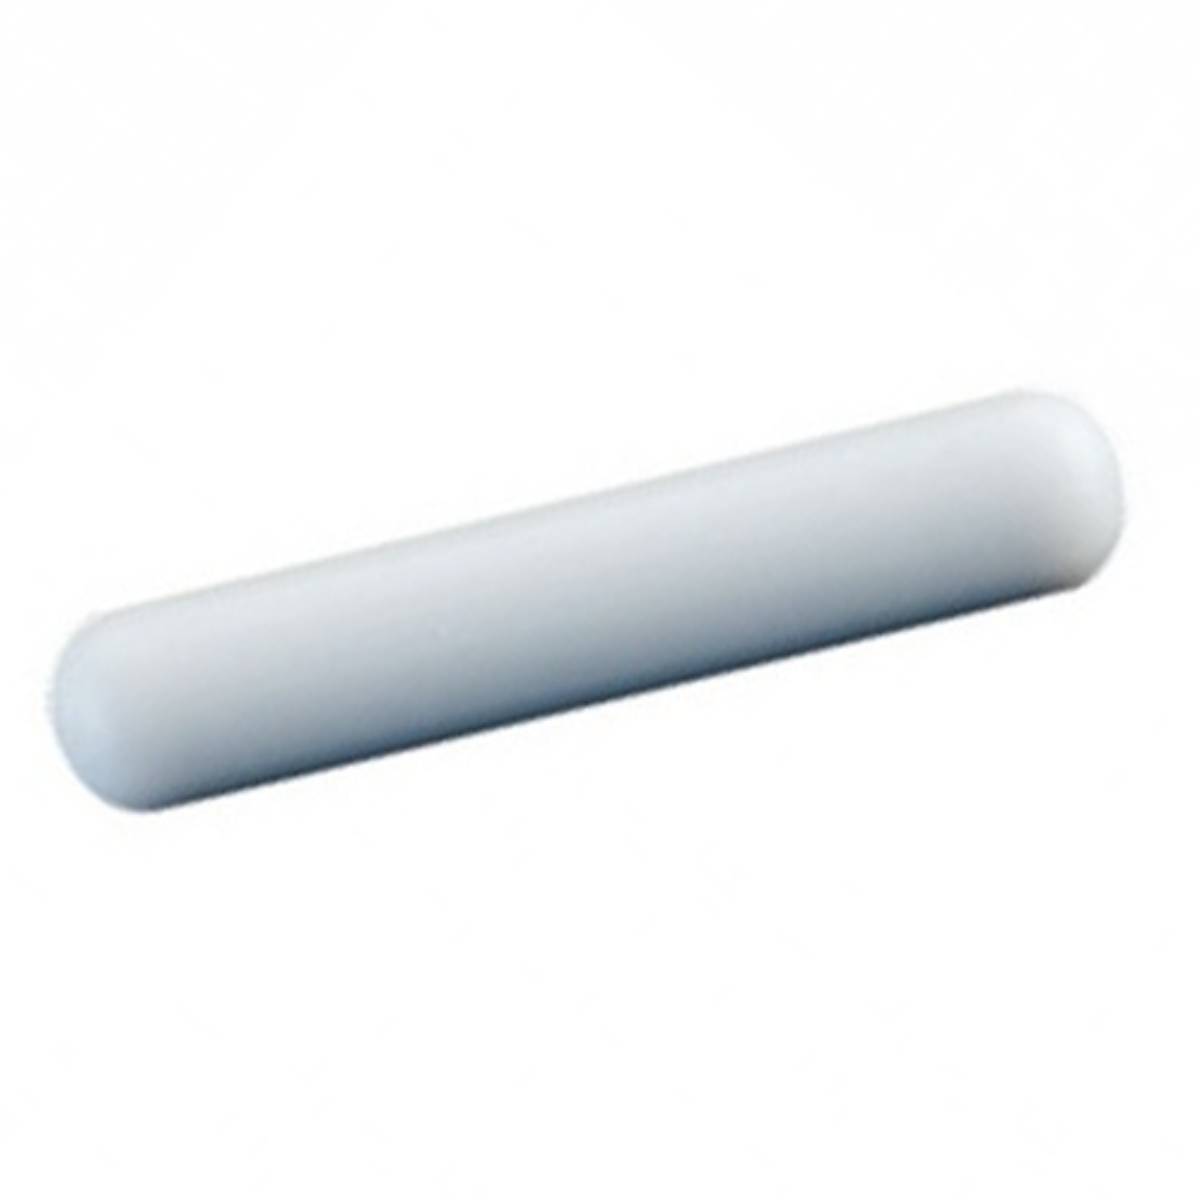 Replacement Pivoting Magnetic Stir Bar 30mm